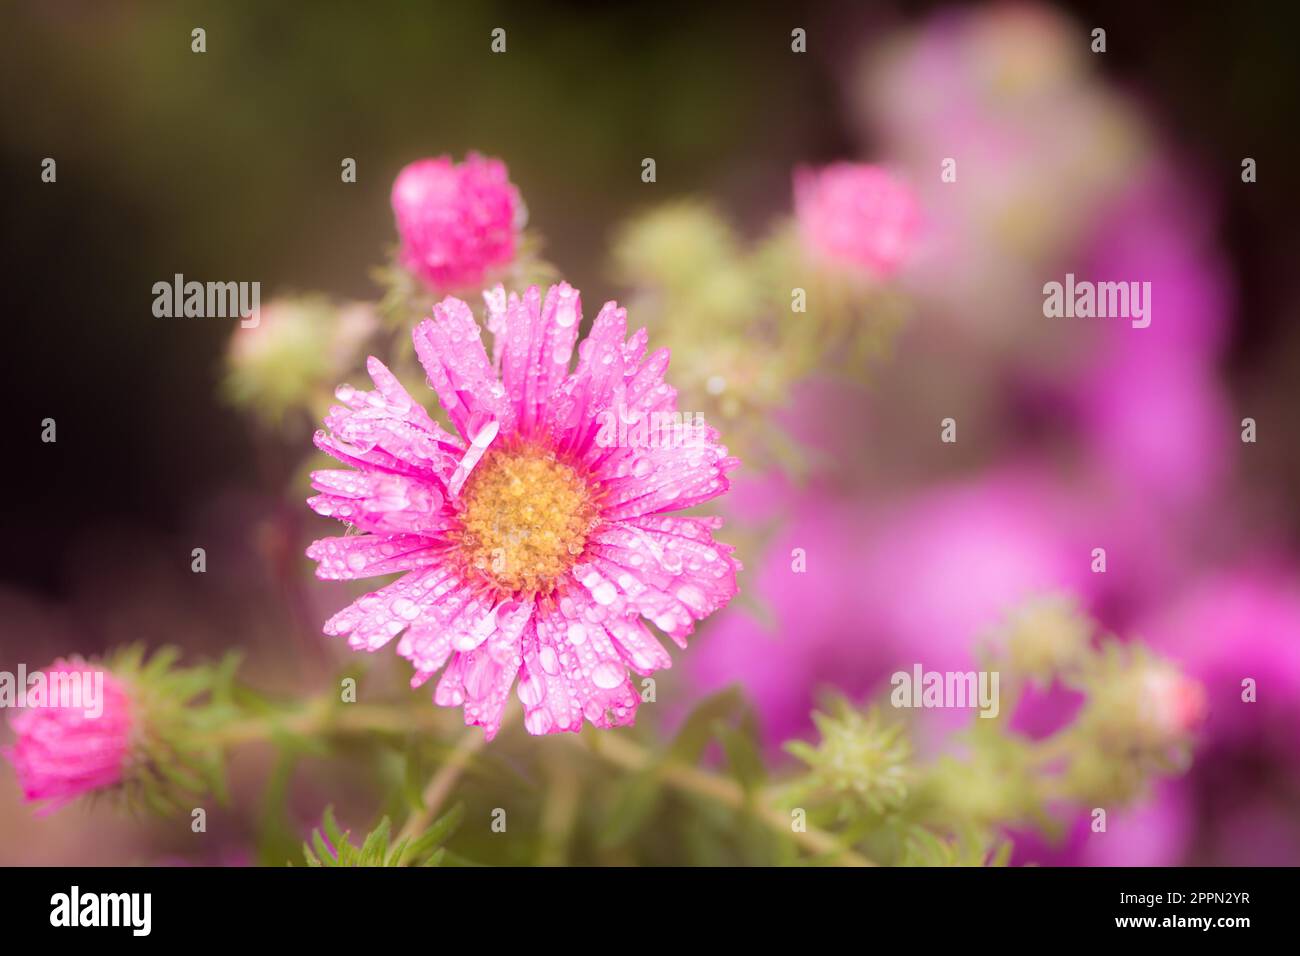 Macro of raindrops on a pink aster flower blossom Stock Photo